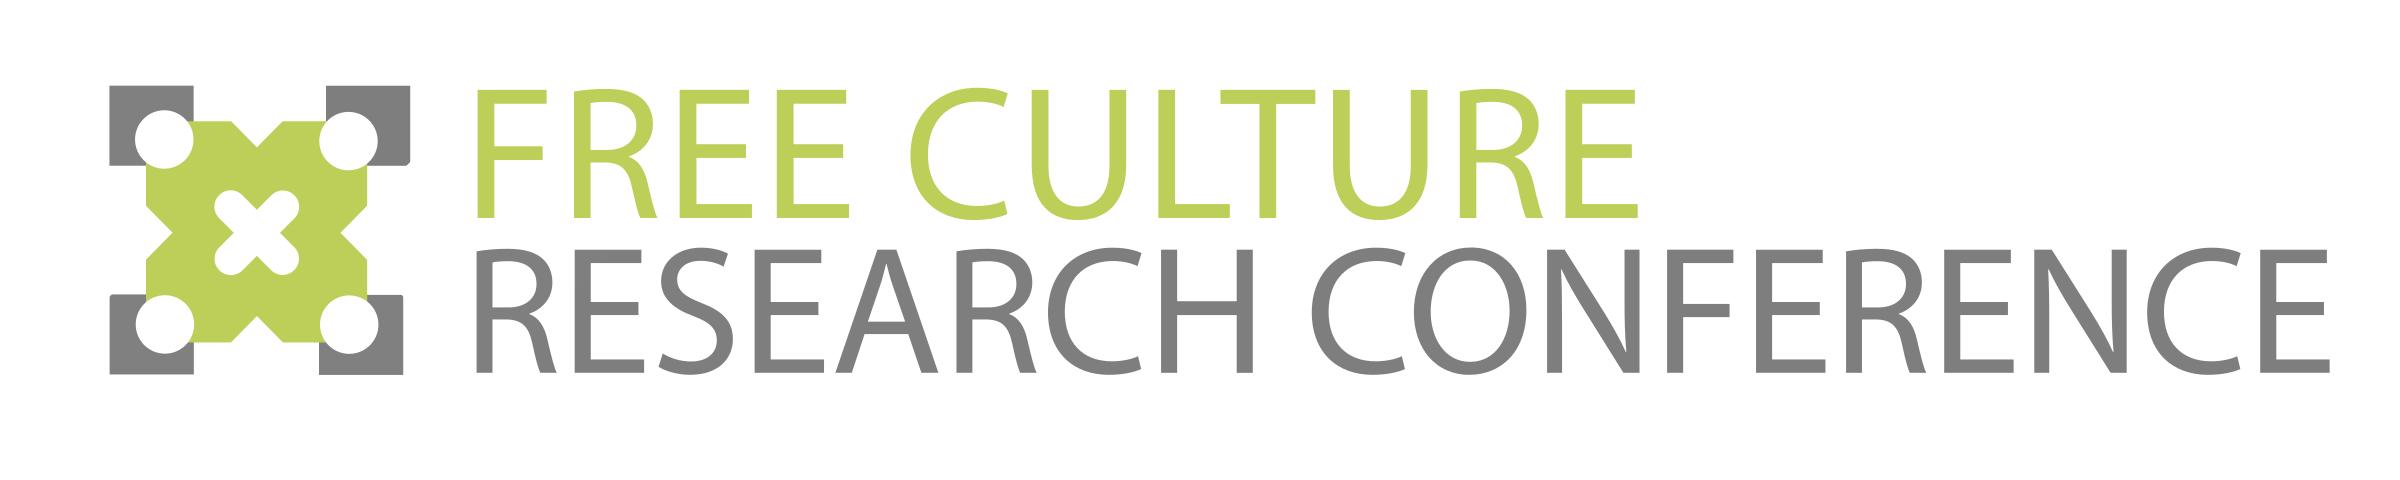 Free Culture Research Conference Logo 5 png